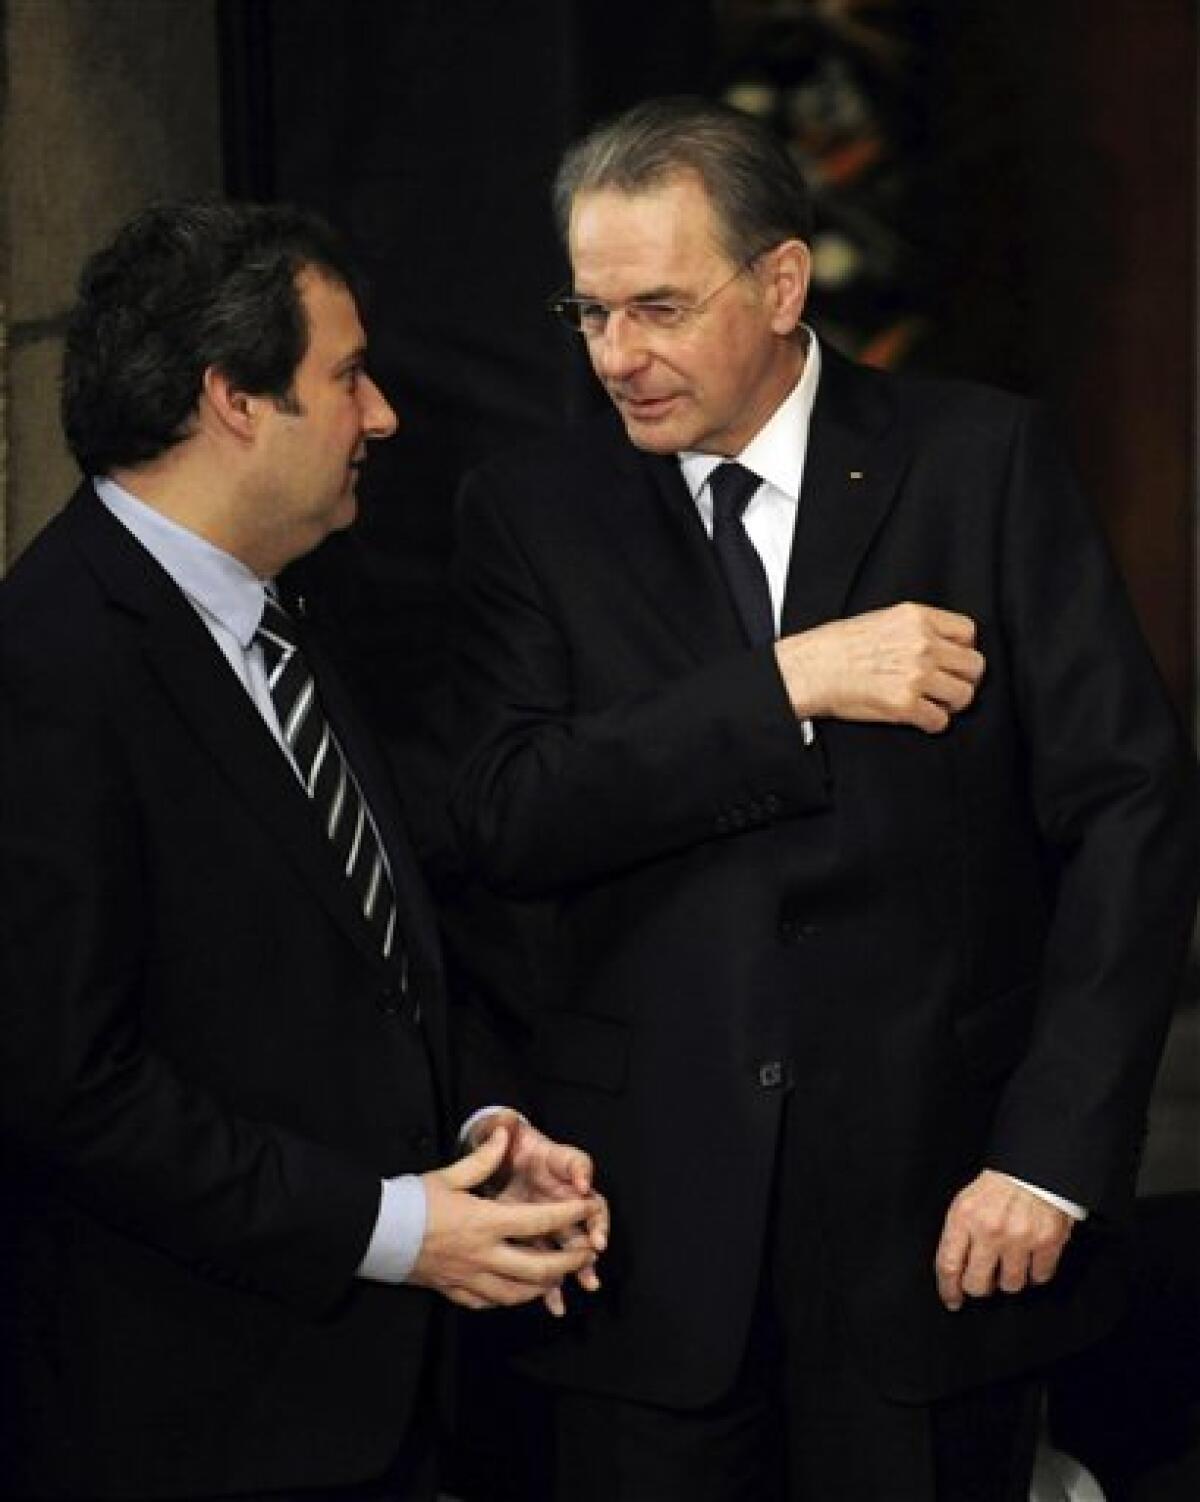 Jacques Rogge, right, President of the International Olympic Committee (IOC), talks with Jordi Hereu, Barcelona's major, during the farewell ceremony for the International Olympic Committee president Juan Antonio Samaranch at the Palau of Generalitat in Barcelona, Spain, on Thursday, April 22, 2010. Former International Olympic Committee president Juan Antonio Samaranch died Wednesday at age 89 in the Quiron Hospital in his home city of Barcelona of cardio-respiratory failure three days after being admitted with heart problems. (AP Photo/David Ramos)